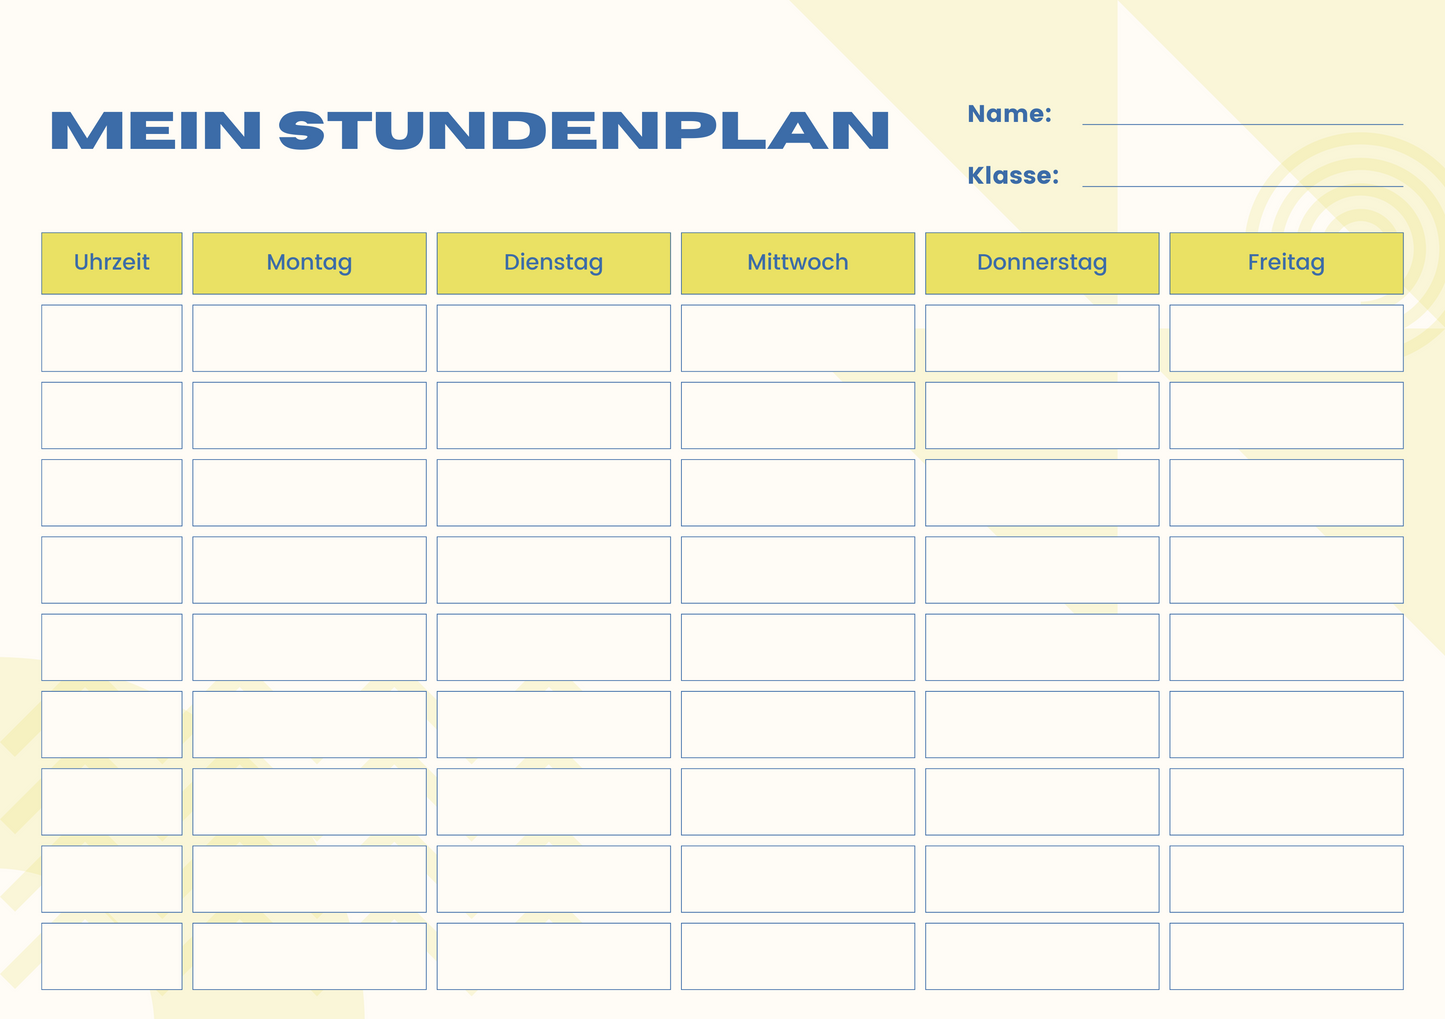 Timetable with Colorful Designs - Available in German and English